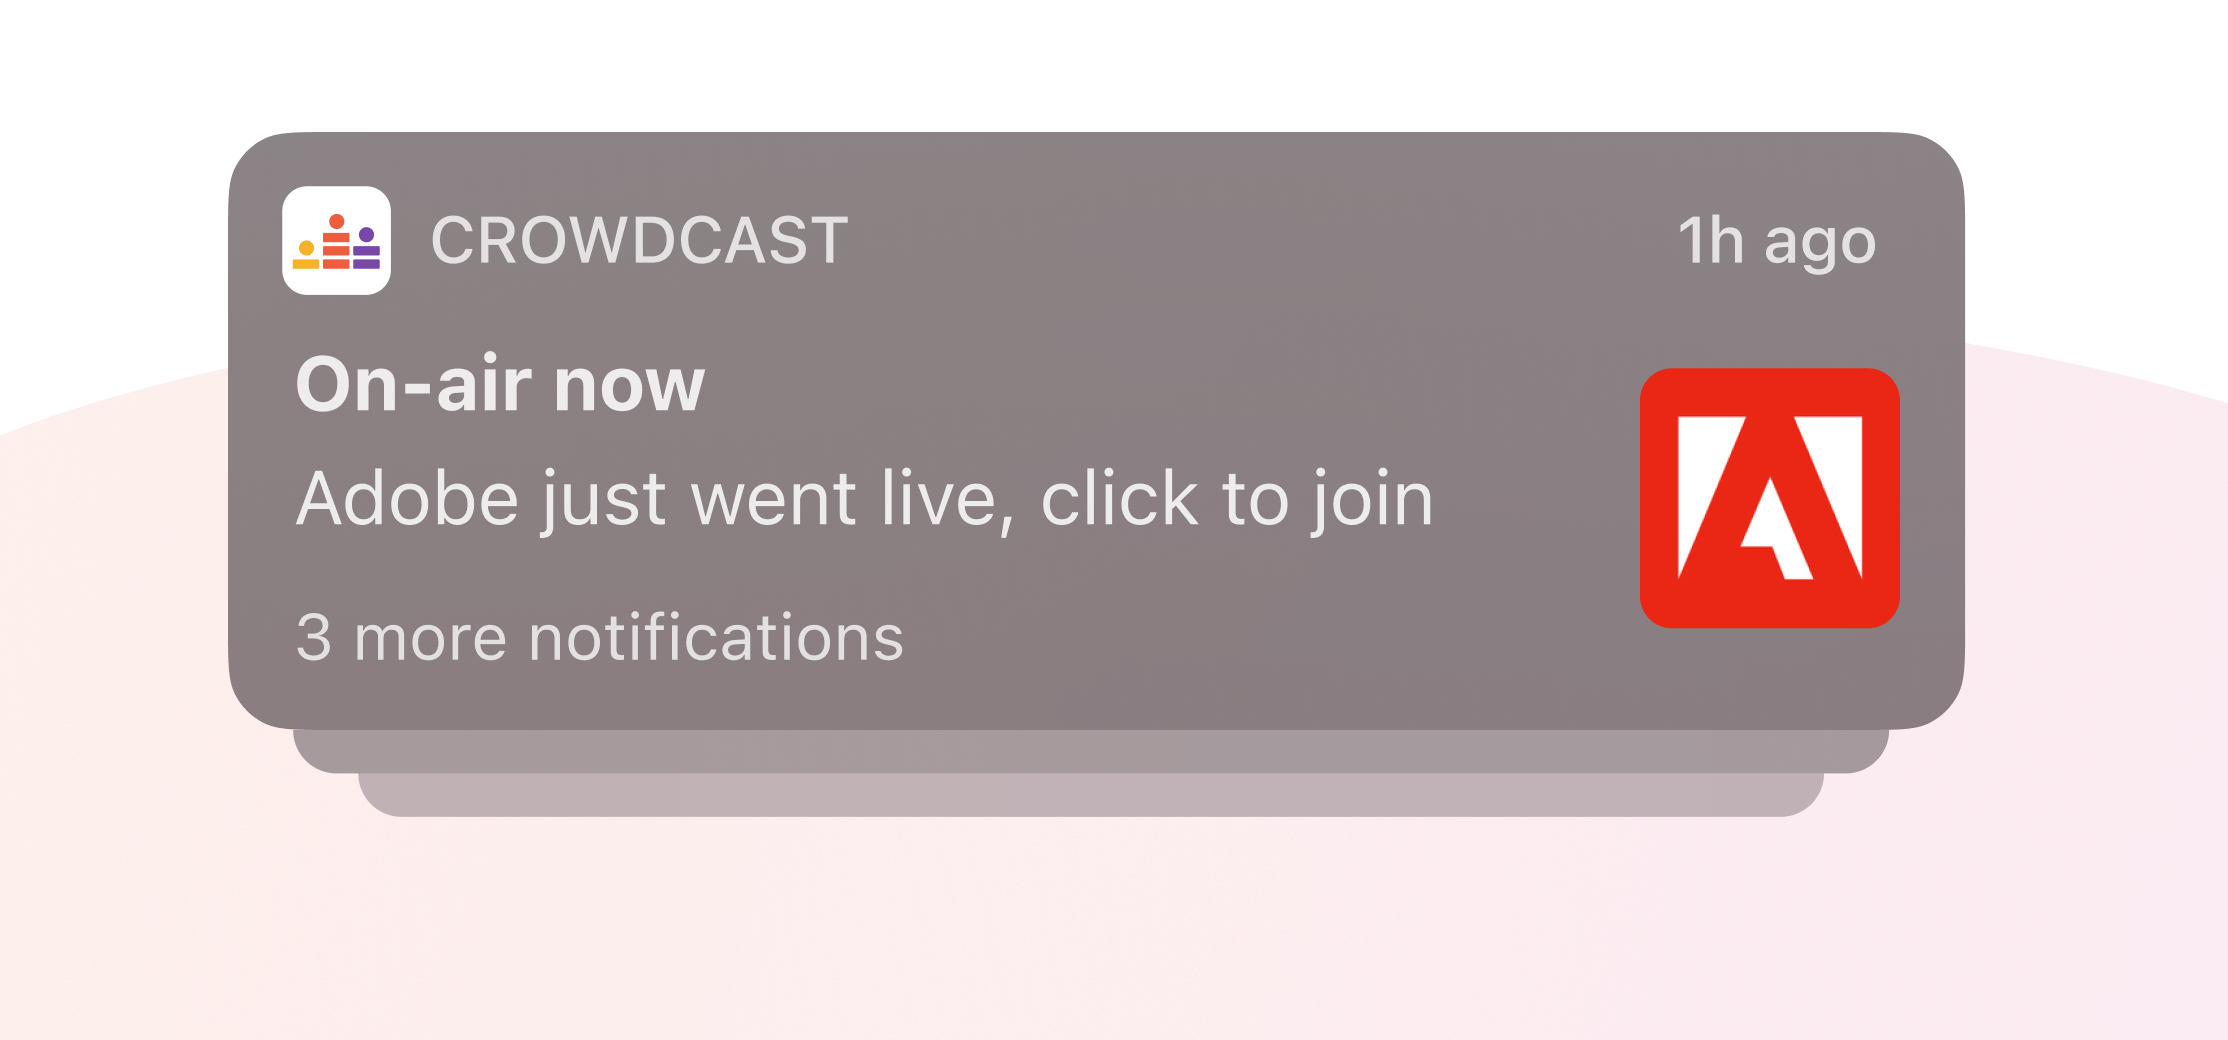 Example of push notifications from crowdcast